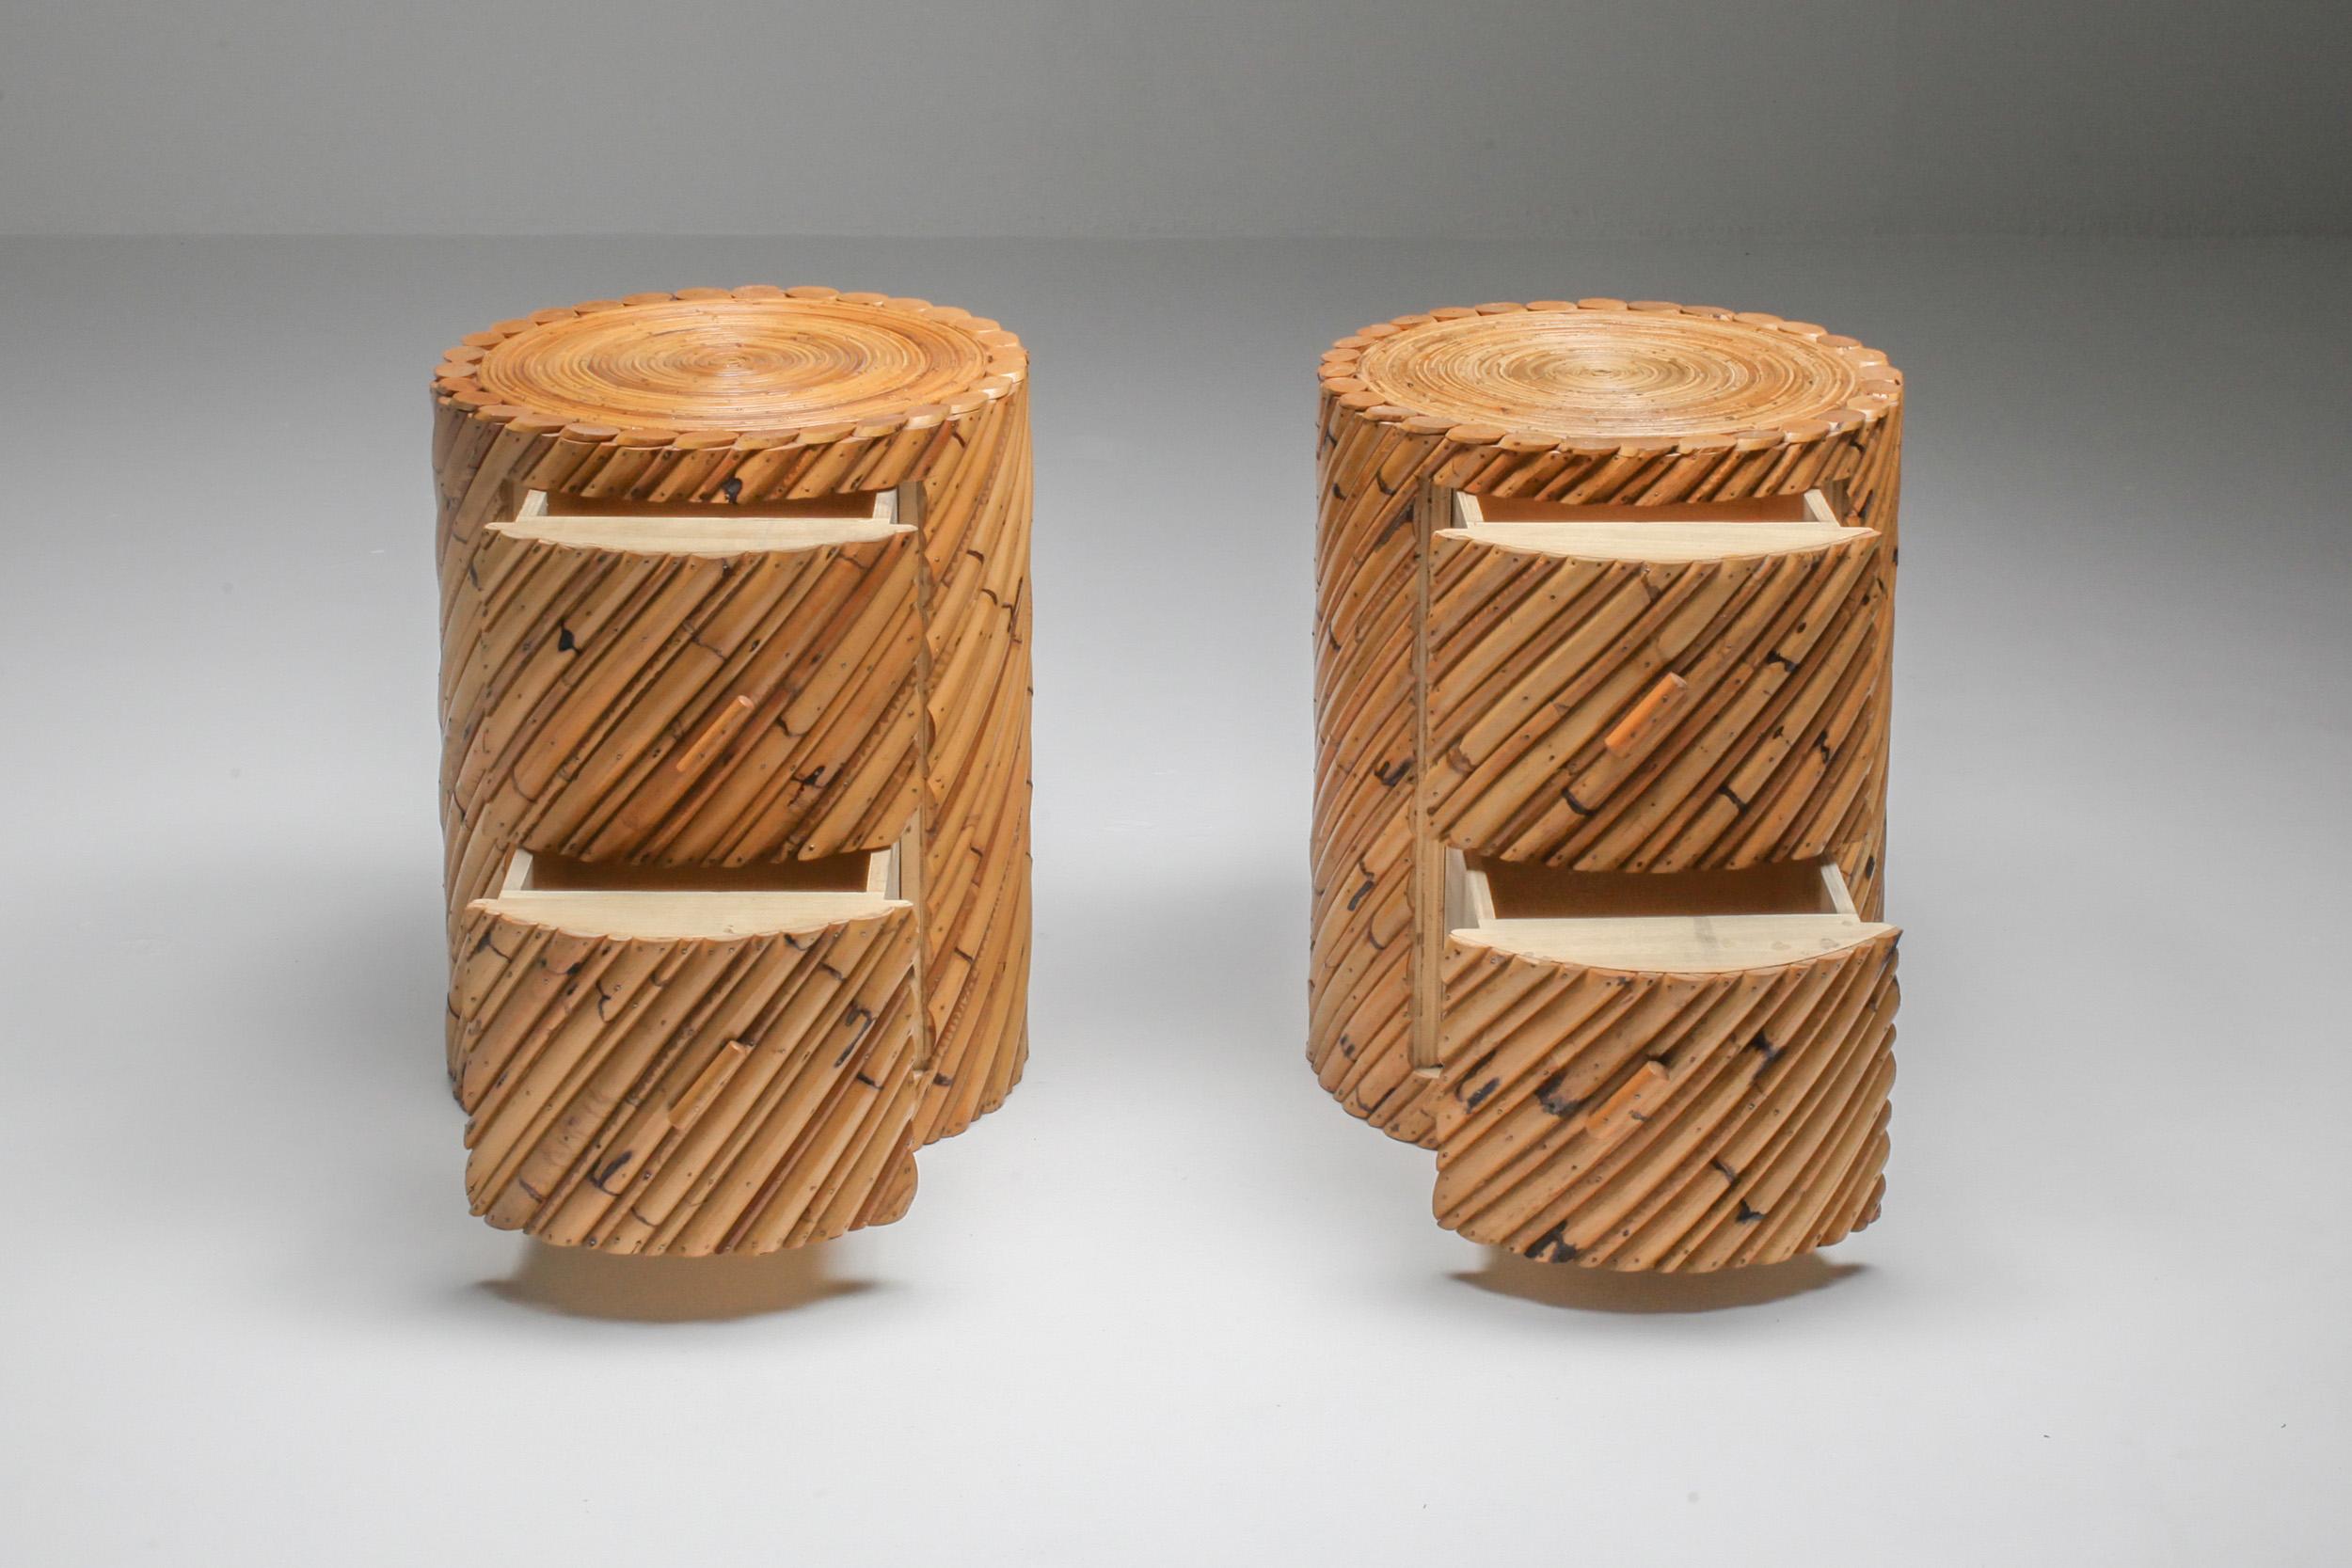 Bamboo and wicker, nightstands, Vivai del Sud, Italy, 1970s

Tropicalist high-end pair of round side tables,
each have two drawers for planty of storage.
Could be used next to your favorite couch or in the bedroom.
Fits well in an eclectic